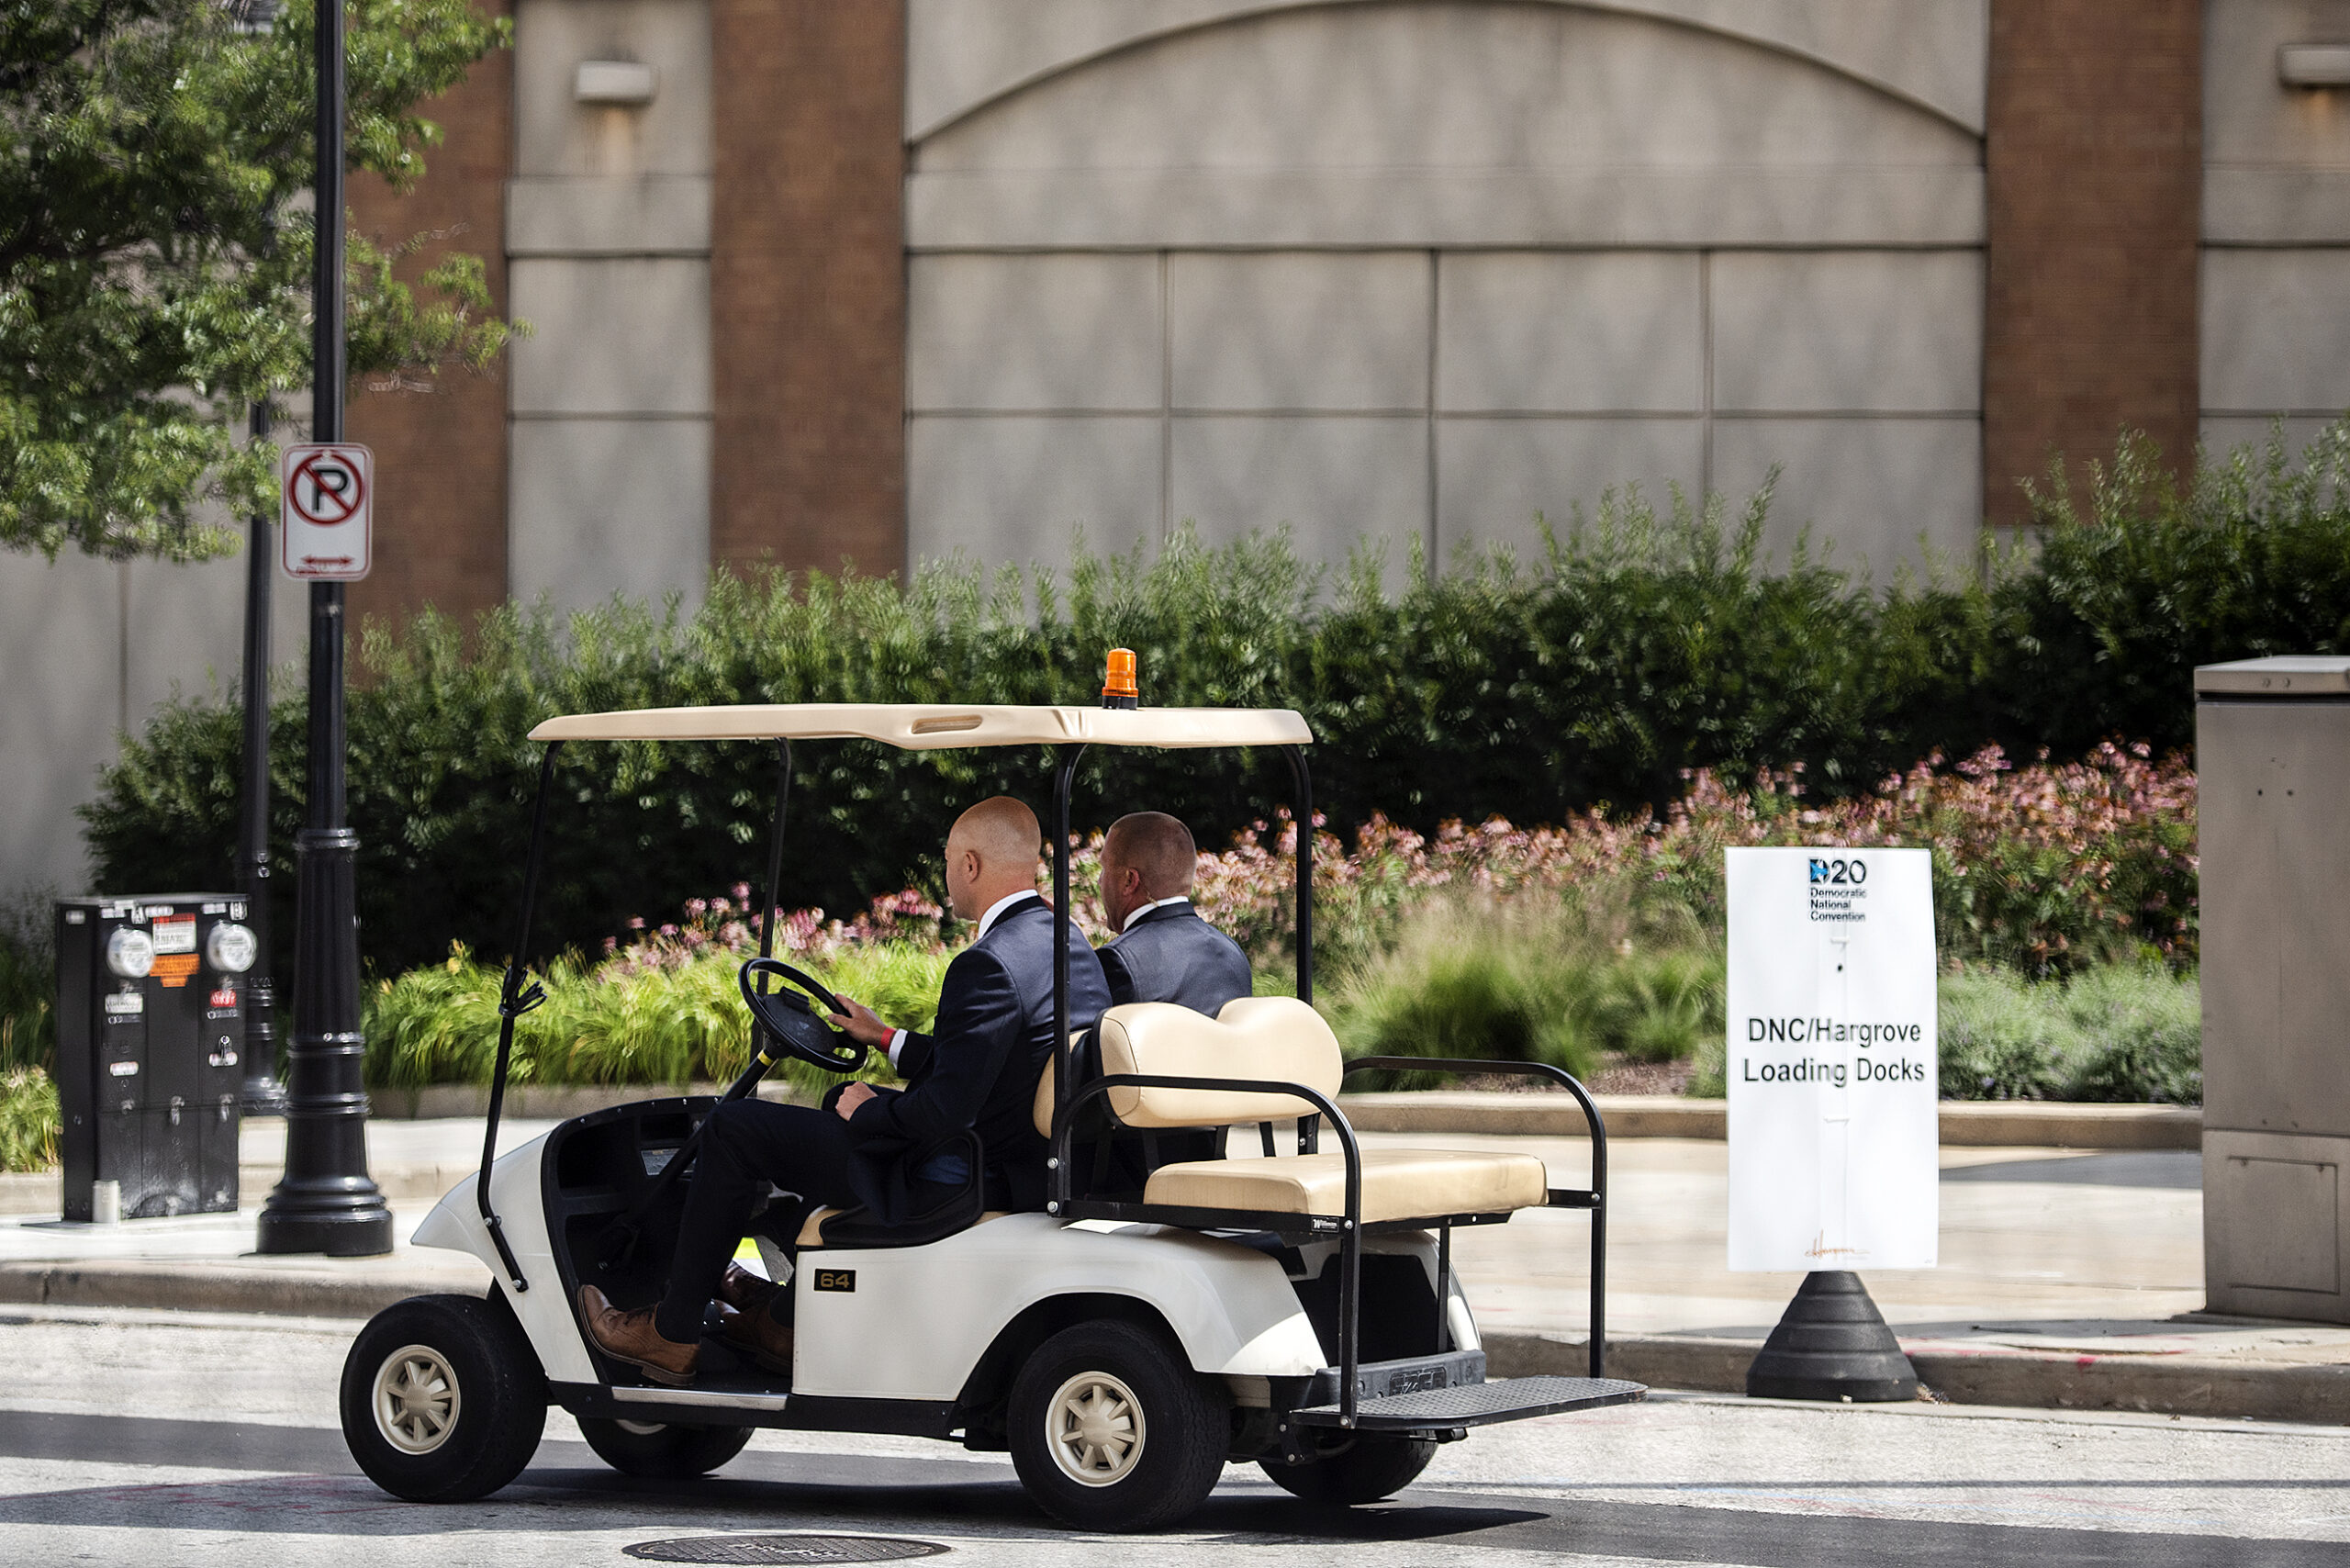 two bald men in suits ride in a golf cart